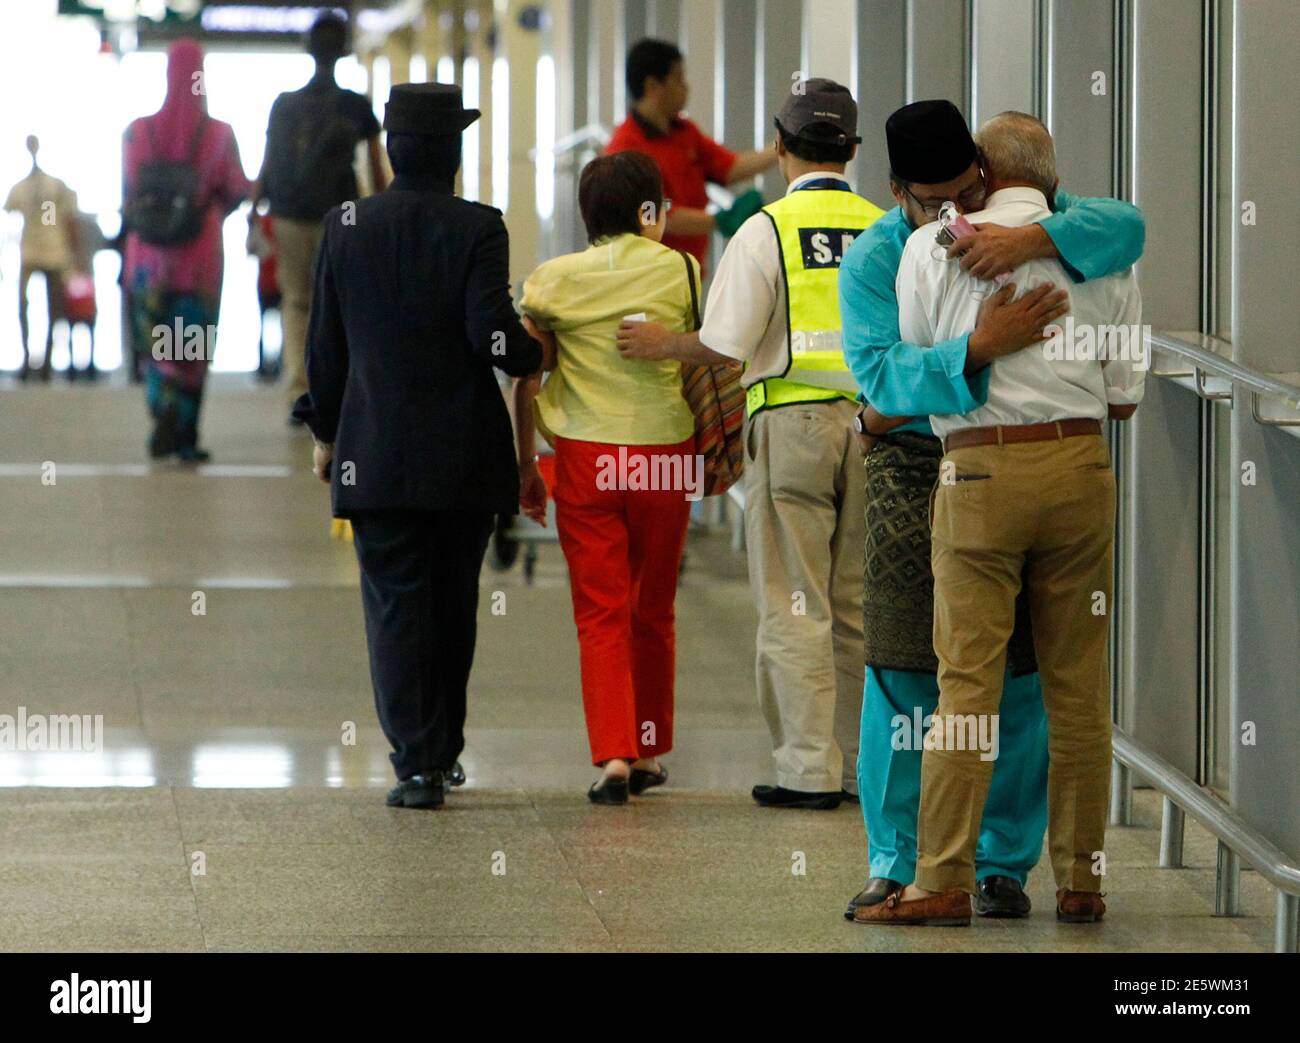 A man (in blue), whose family was onboard Malaysia Airlines MH17, consoles another man who had just arrived with his wife to receive confirmation that their daughter's family was onboard the plane, at Kuala Lumpur International Airport in Sepang July 18, 2014. The United States believes a surface-to-air missile brought down a Malaysian airliner that crashed in eastern Ukraine on Thursday, killing all 298 people on board, an incident that sharply raises the stakes in a conflict between Kiev and pro-Moscow rebels.  REUTERS/Edgar Su (MALAYSIA - Tags: TRANSPORT DISASTER) Stock Photo